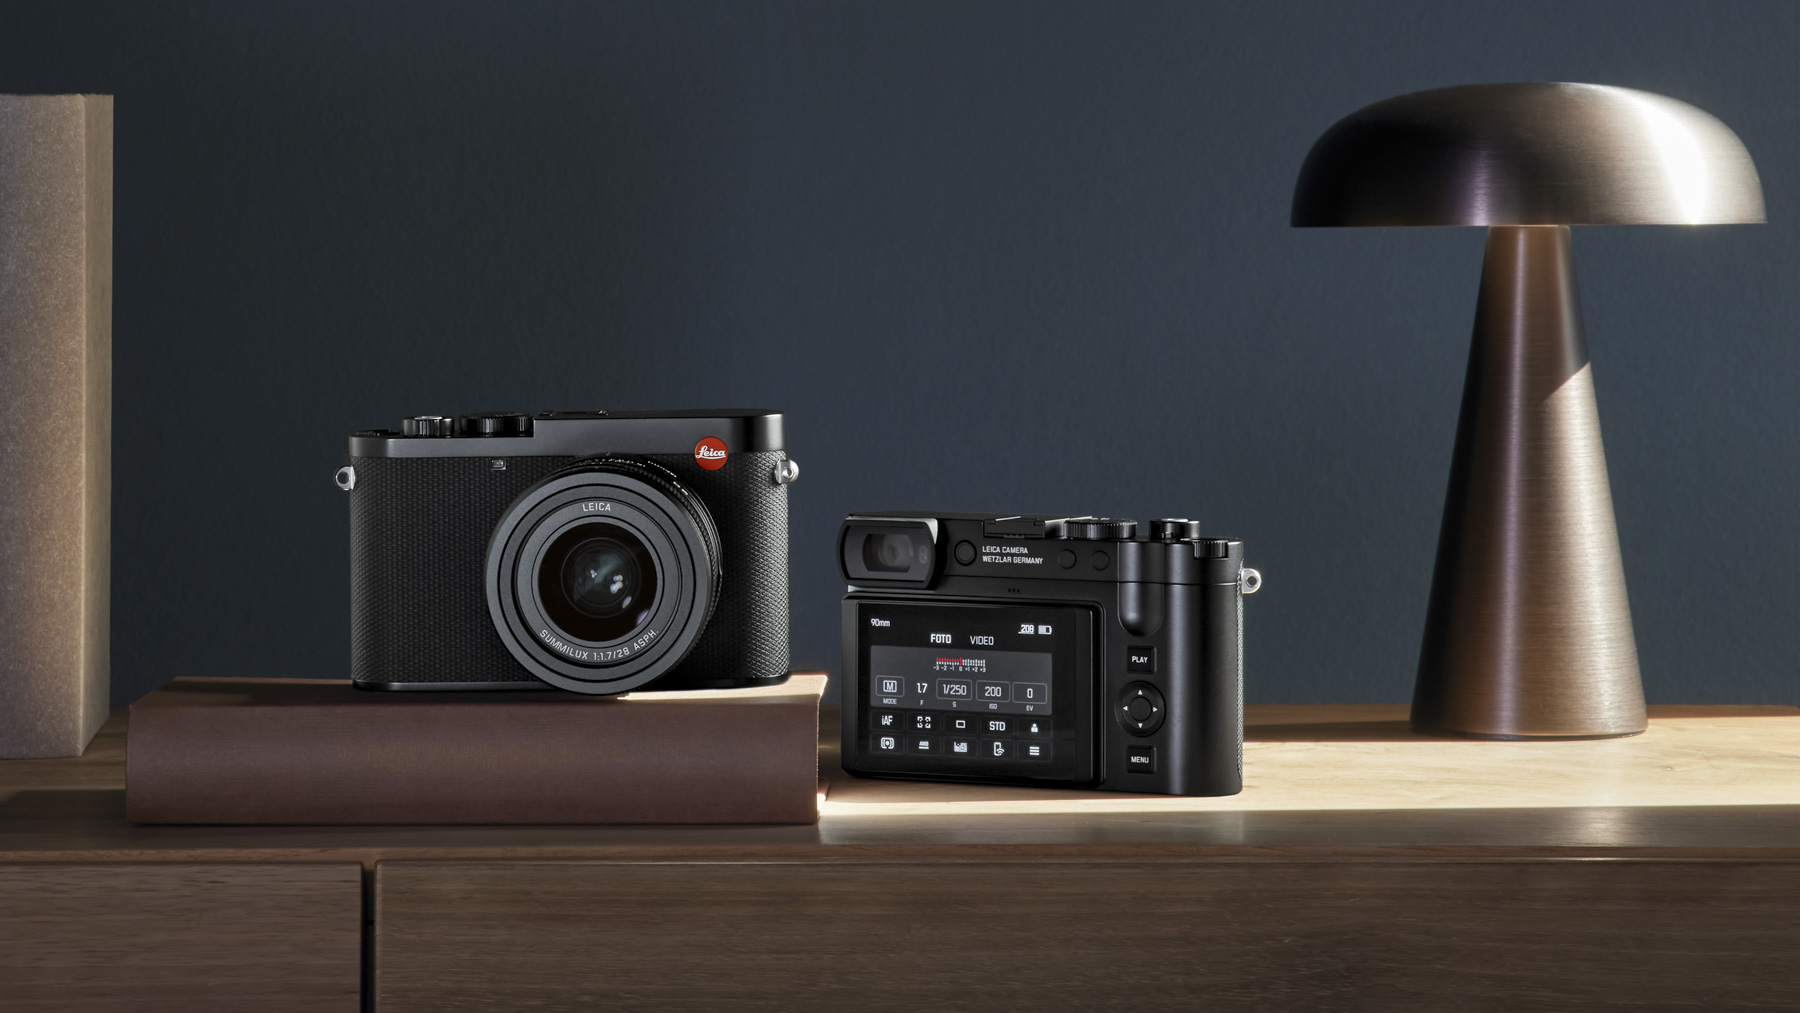 Two Leica Q3 cameras, one facing front and the other away, on wooden table